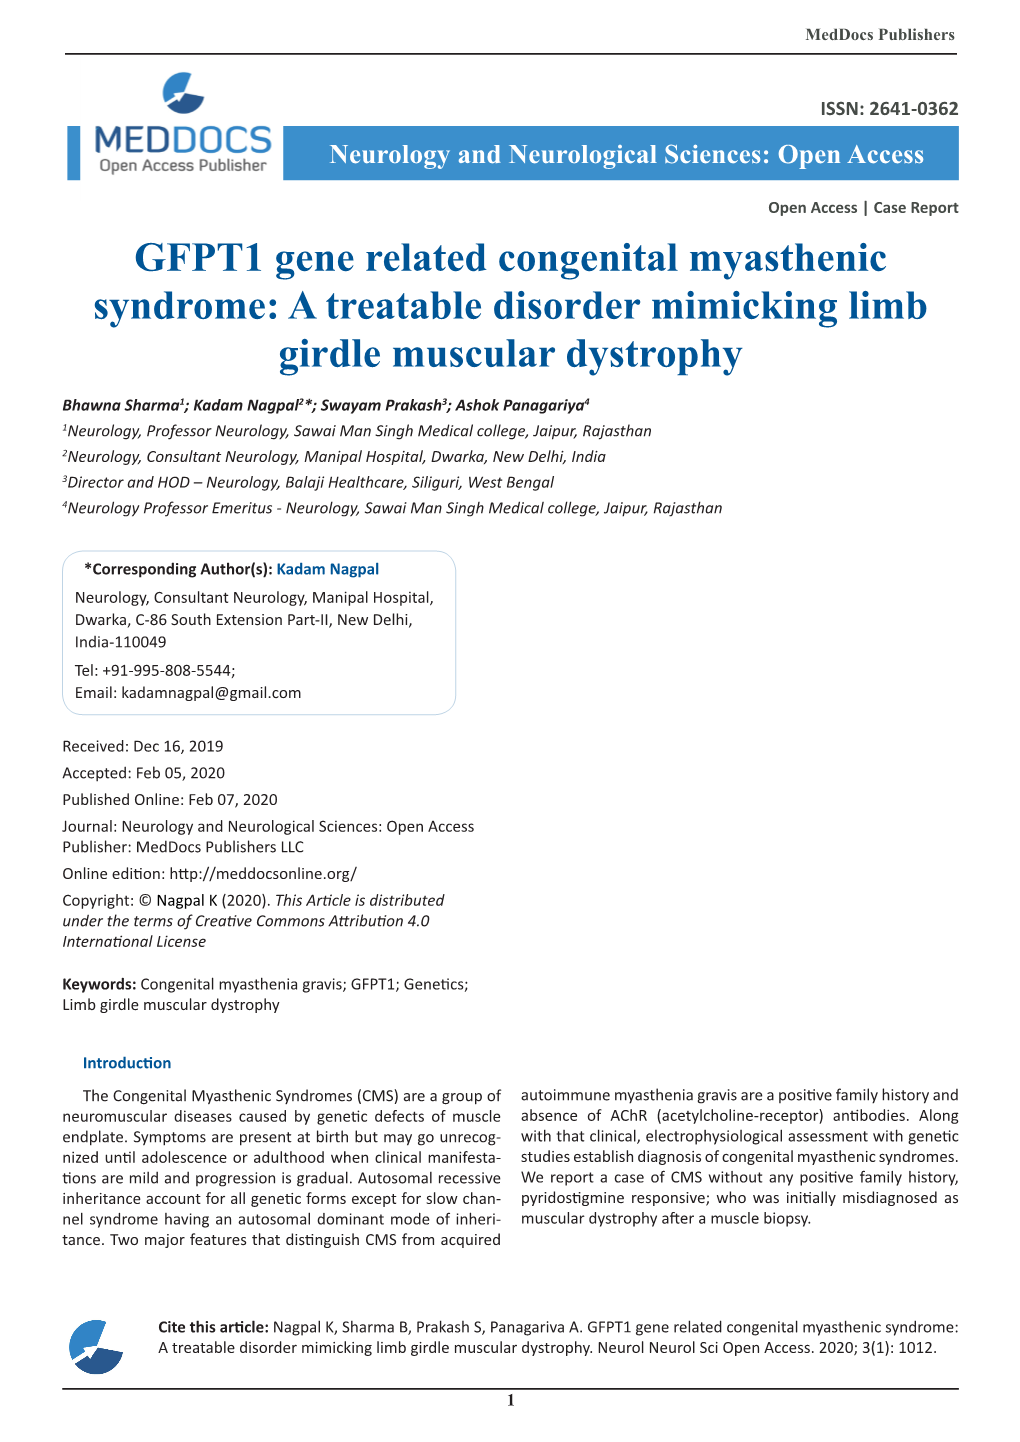 GFPT1 Gene Related Congenital Myasthenic Syndrome: a Treatable Disorder Mimicking Limb Girdle Muscular Dystrophy